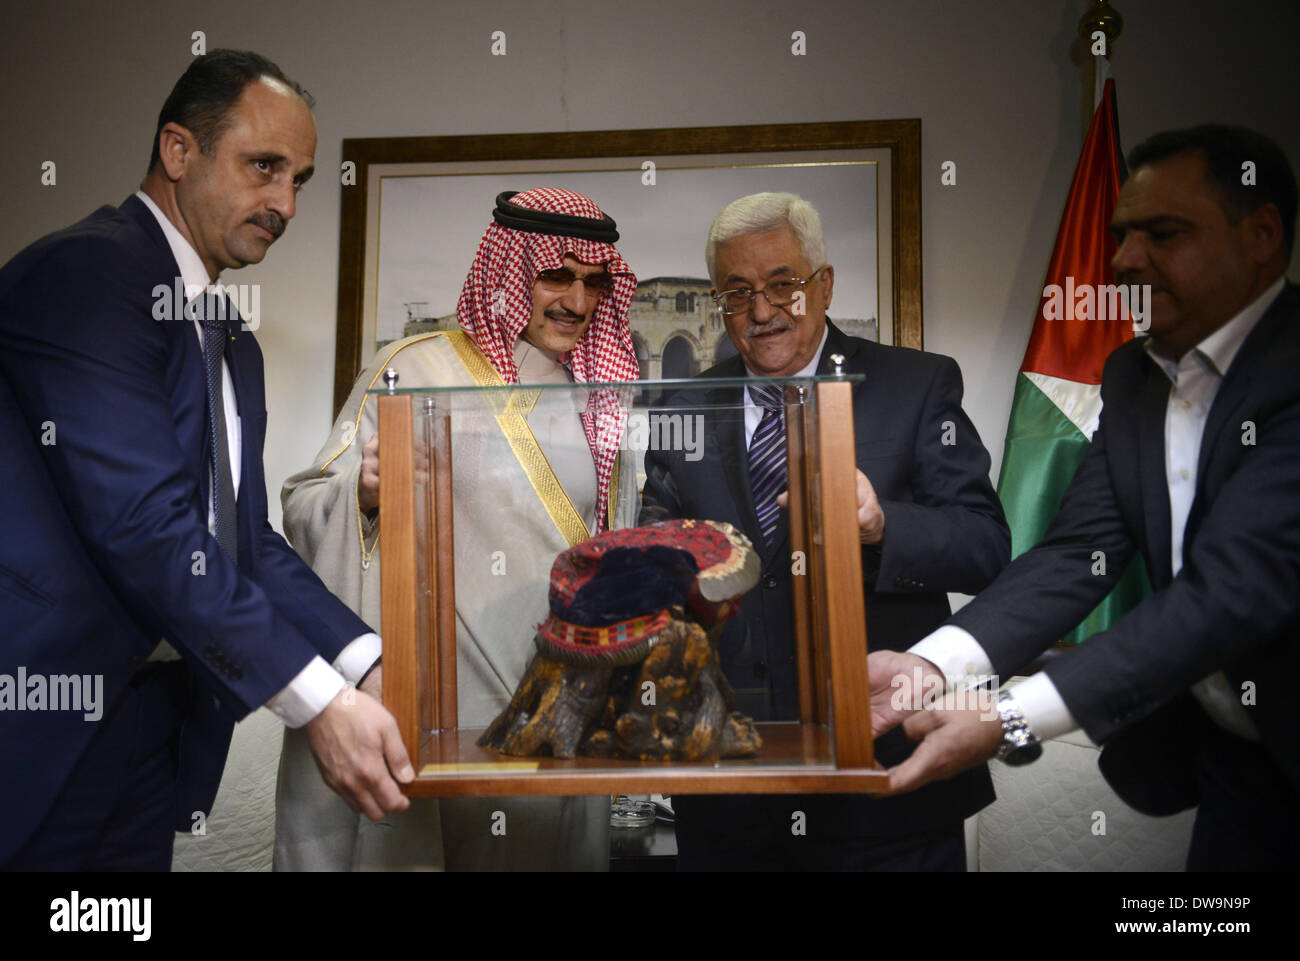 Ramallah, West Bank, Palestinian Territory. 4th Mar, 2014. Palestinian President Mahmoud Abbas (R) honors Saudi Arabia's prince Al-Waleed bin Talal during their meeting in the West Bank city of Ramallah on March 4, 2014 Credit:  Issam Rimawi/APA Images/ZUMAPRESS.com/Alamy Live News Stock Photo